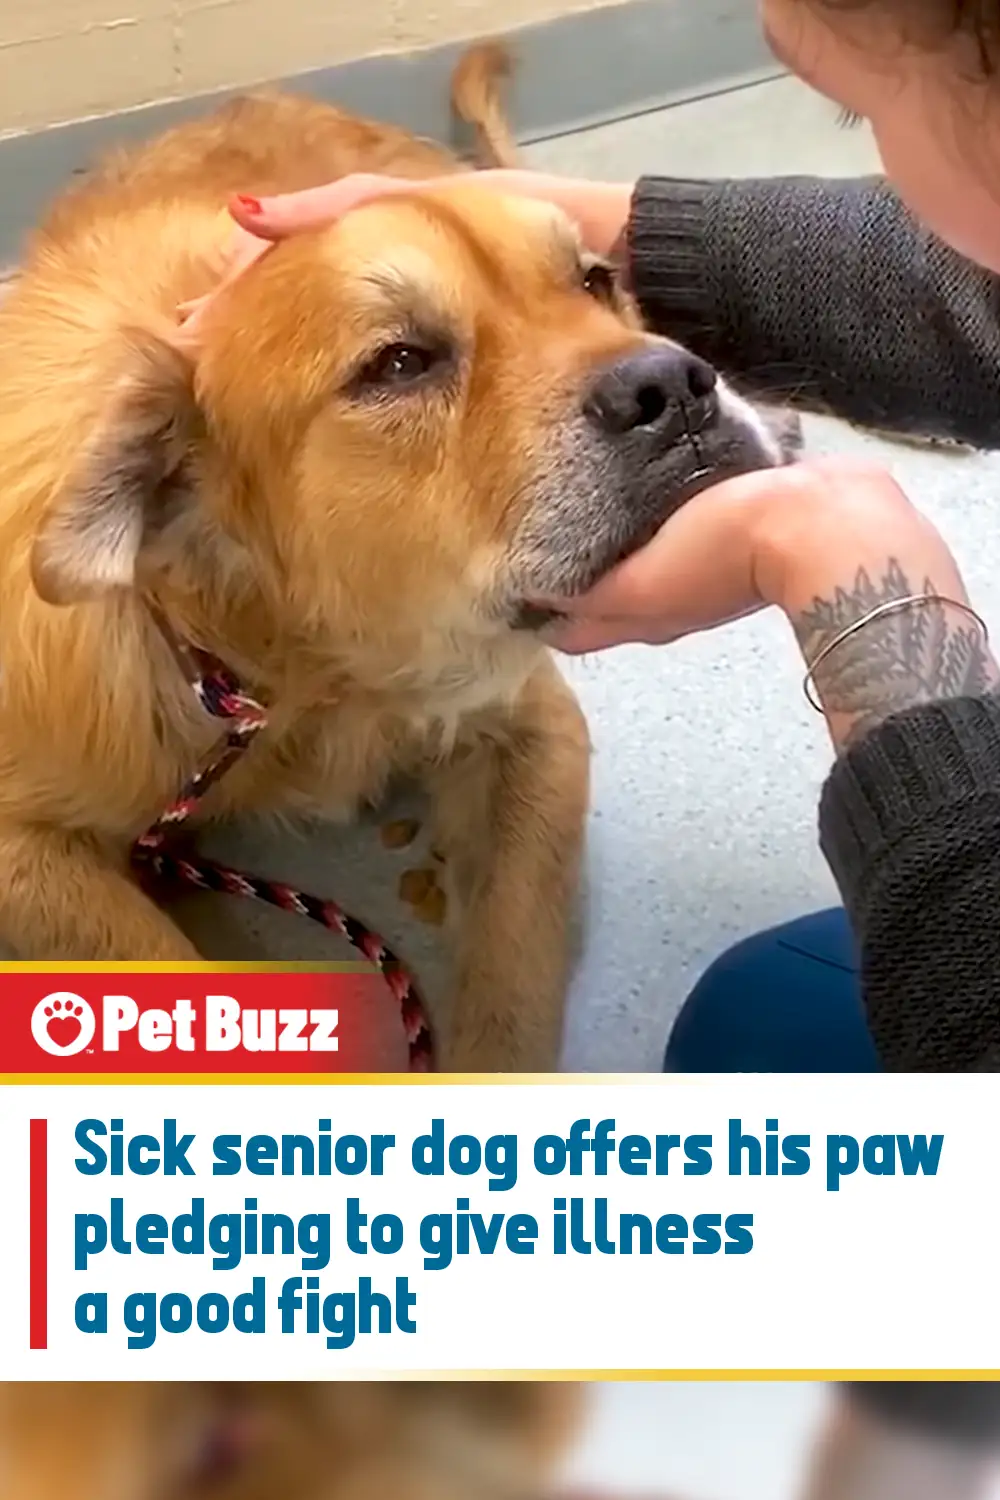 Sick senior dog offers his paw pledging to give illness a good fight